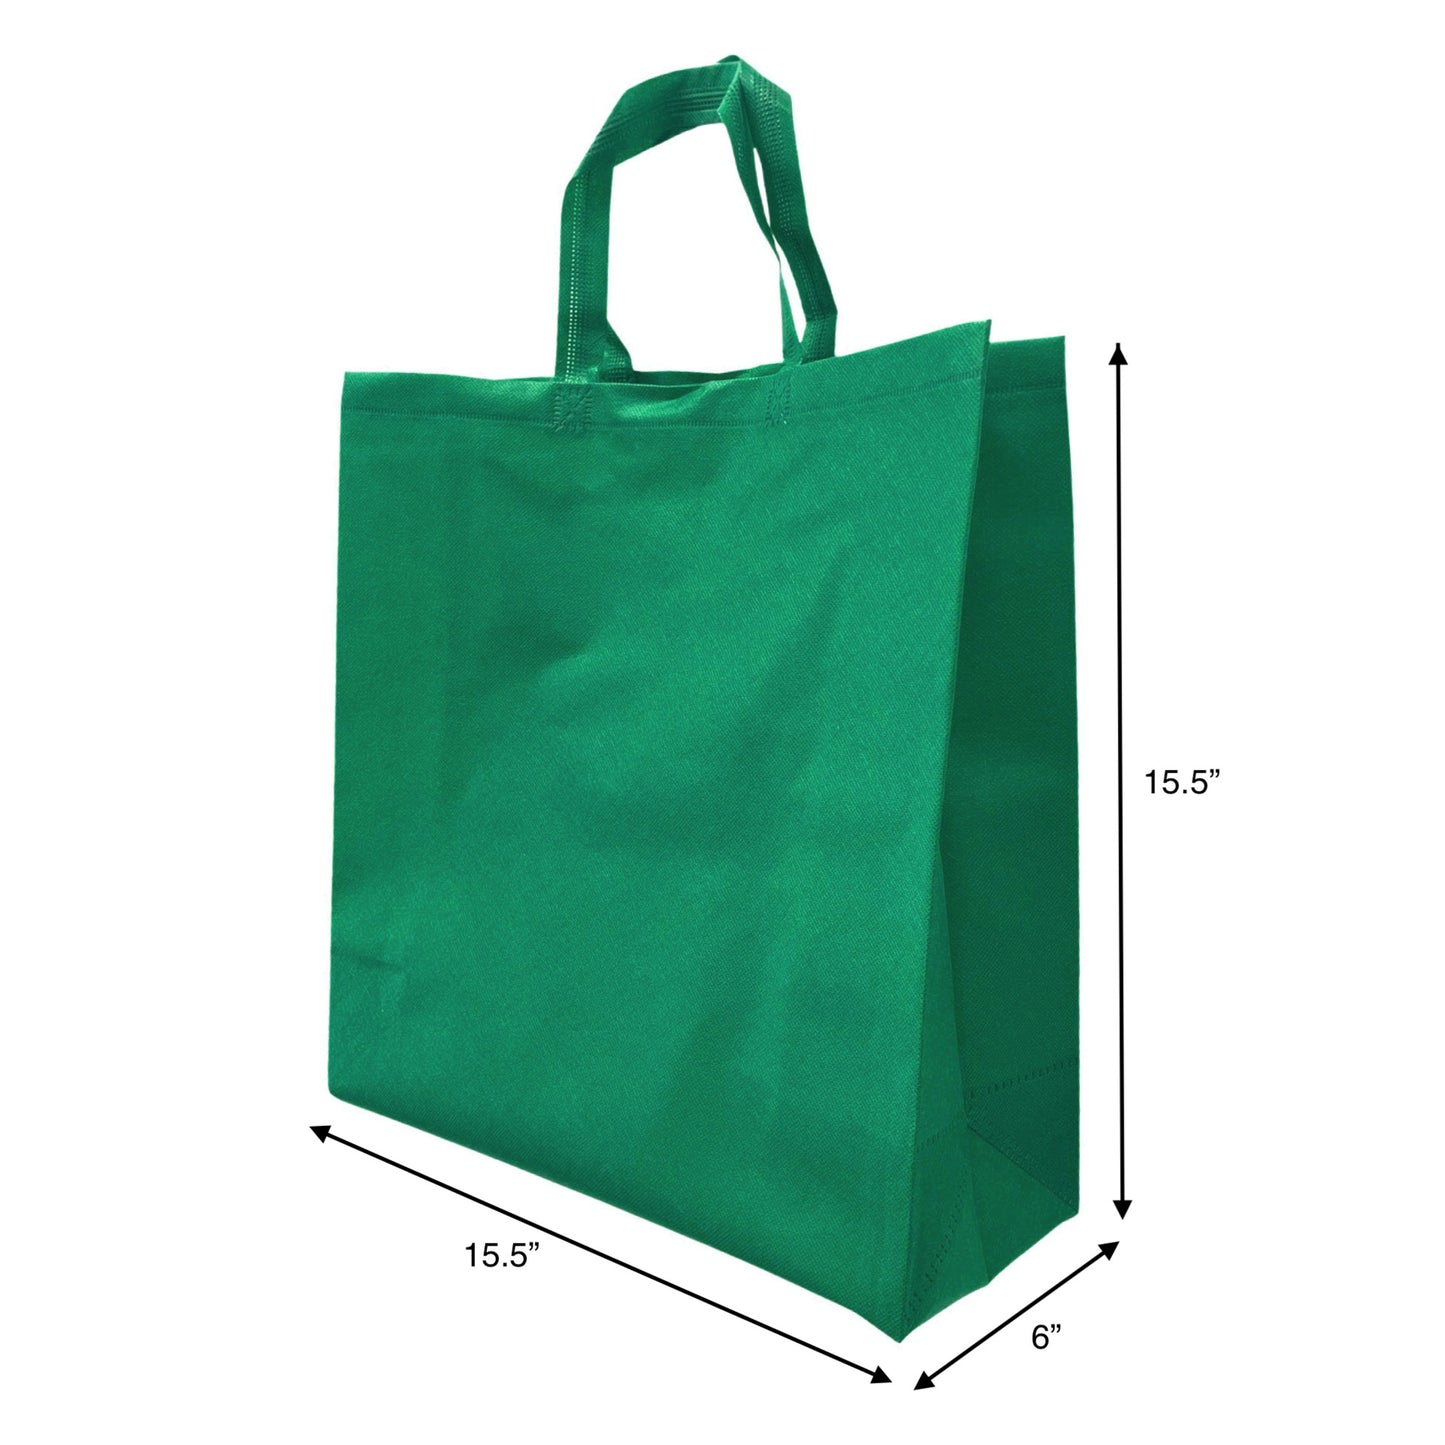 200pcs, Grocer, 15.5x6x15.5 inches, Dark Green Non-Woven Reusable shopping Bags, with Flat handle